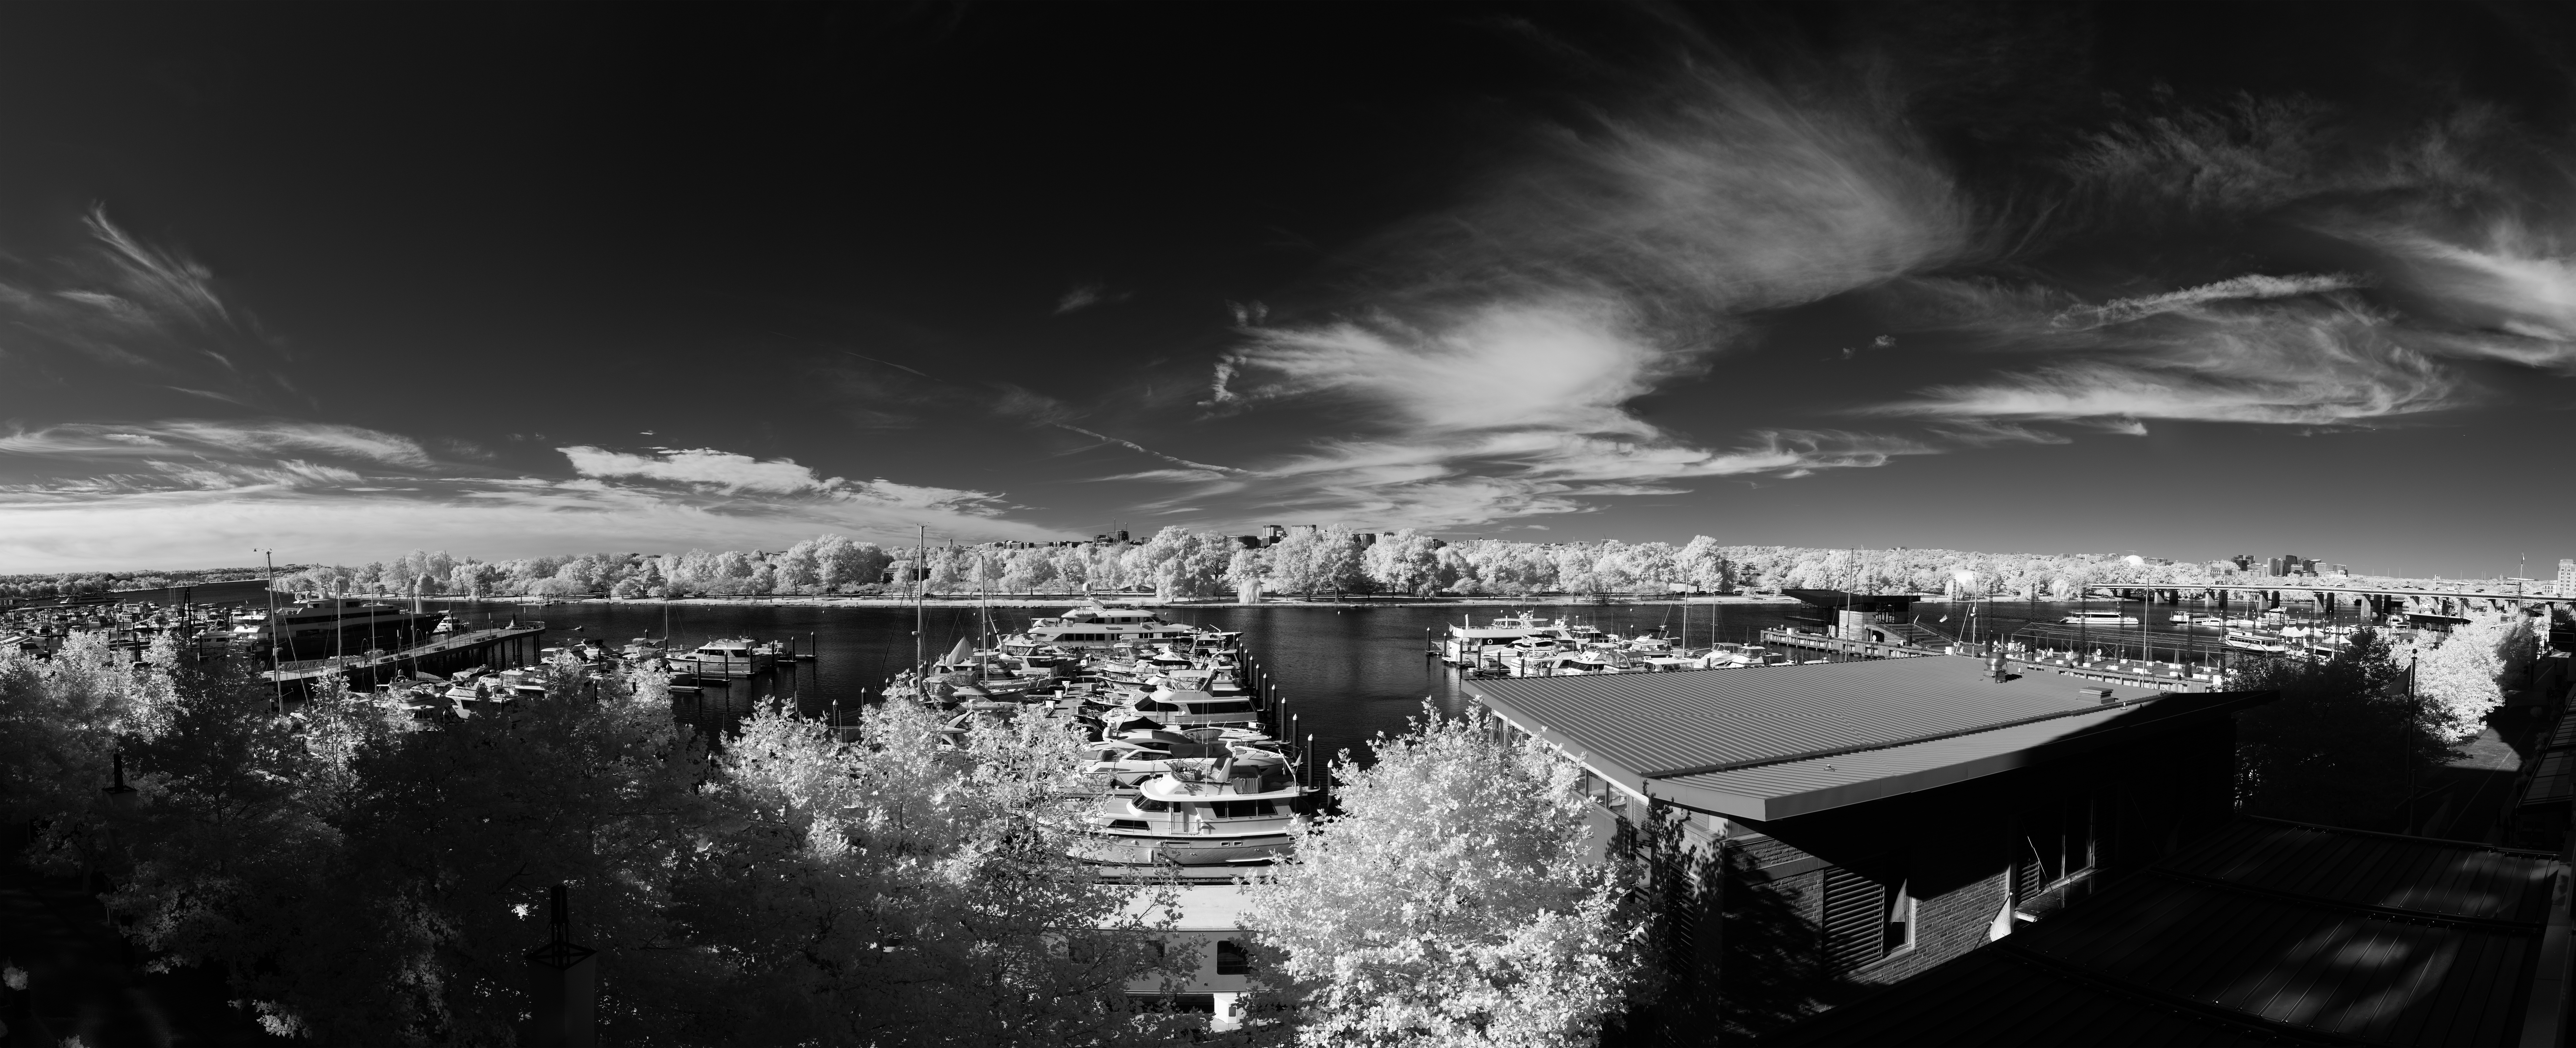 Infrared Panoramic Photo Overlooking Trees and Esplanade at Yacht Docks and Beyond.